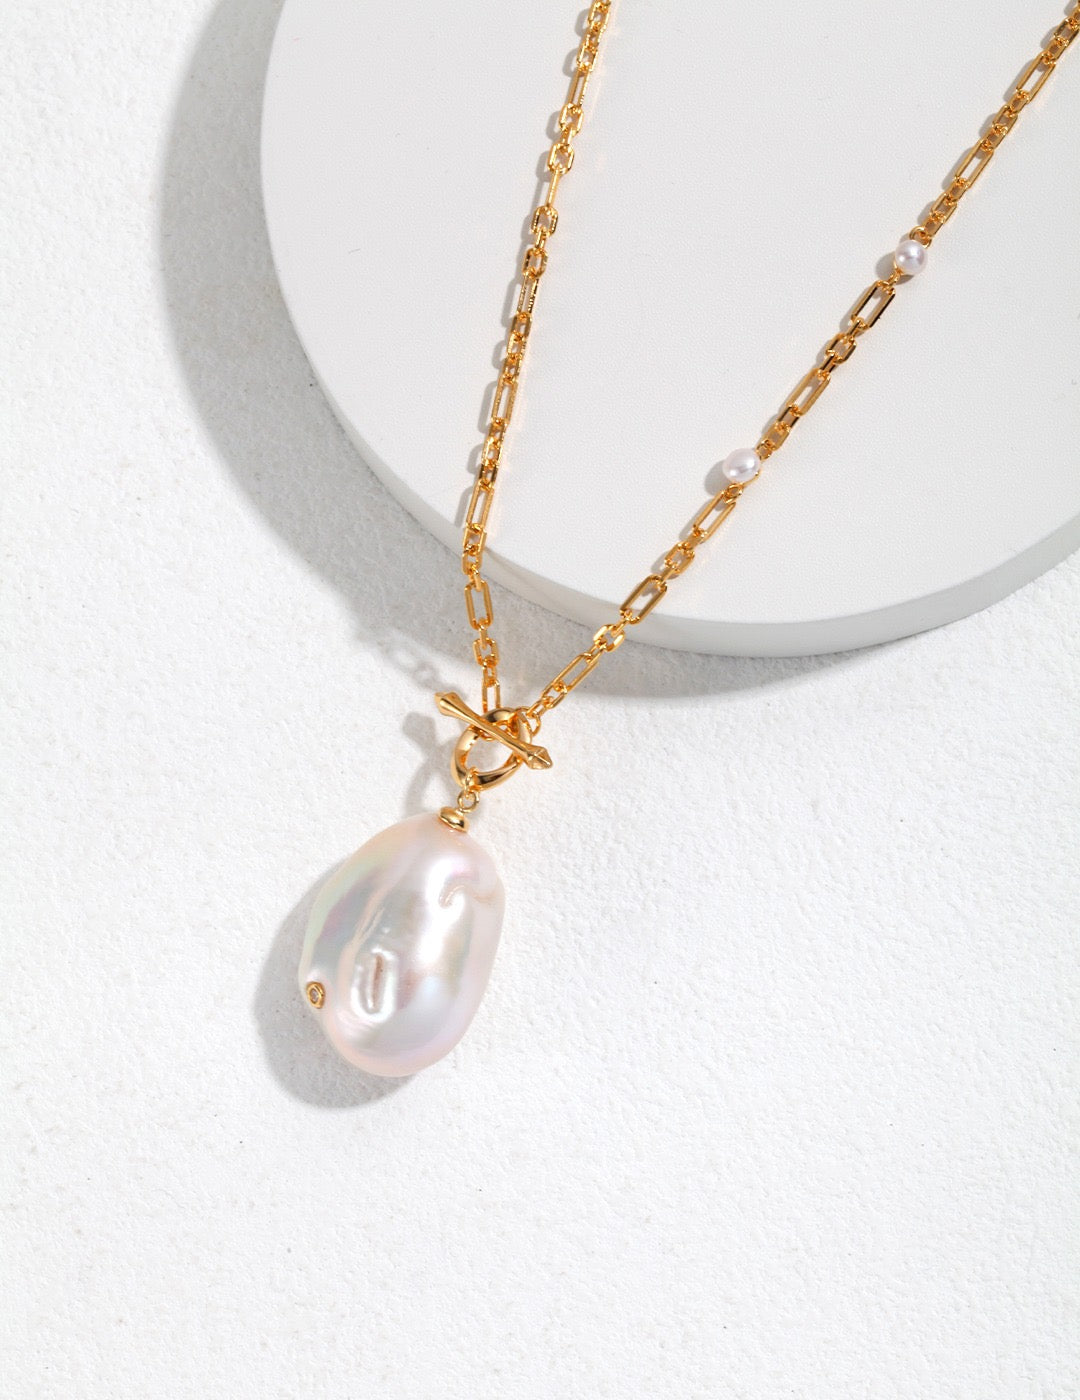 Baroque Pearl Necklace,Baroque Pearl Pendant Necklace ,Irregular Baroque Pearl Pendant Necklace ,Bridesmaids Gifts